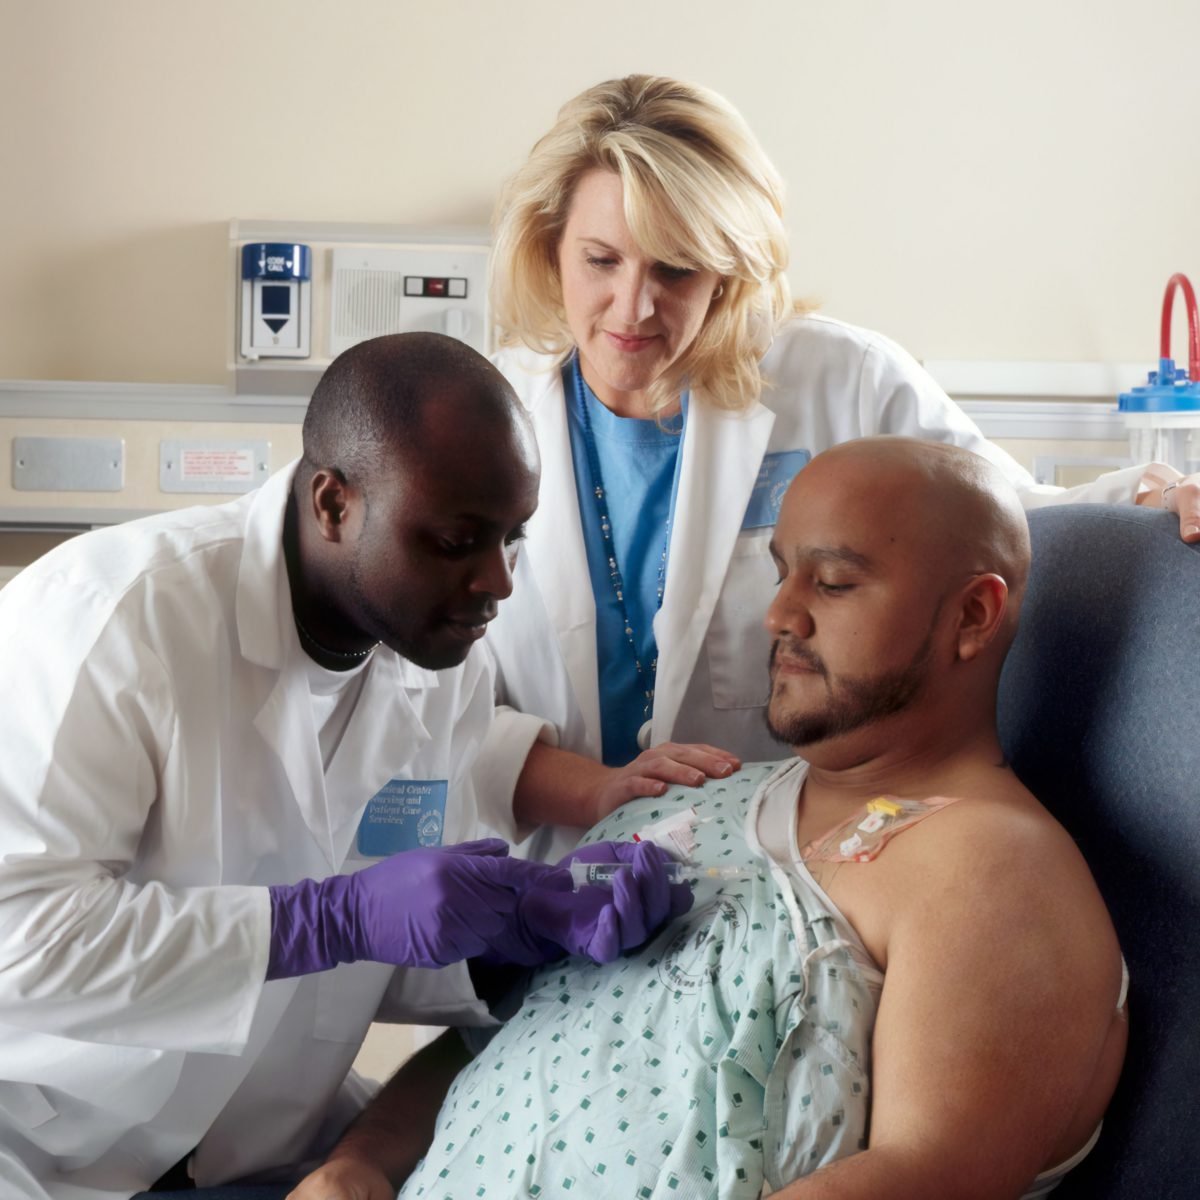 Patient in hospital receiving chemo